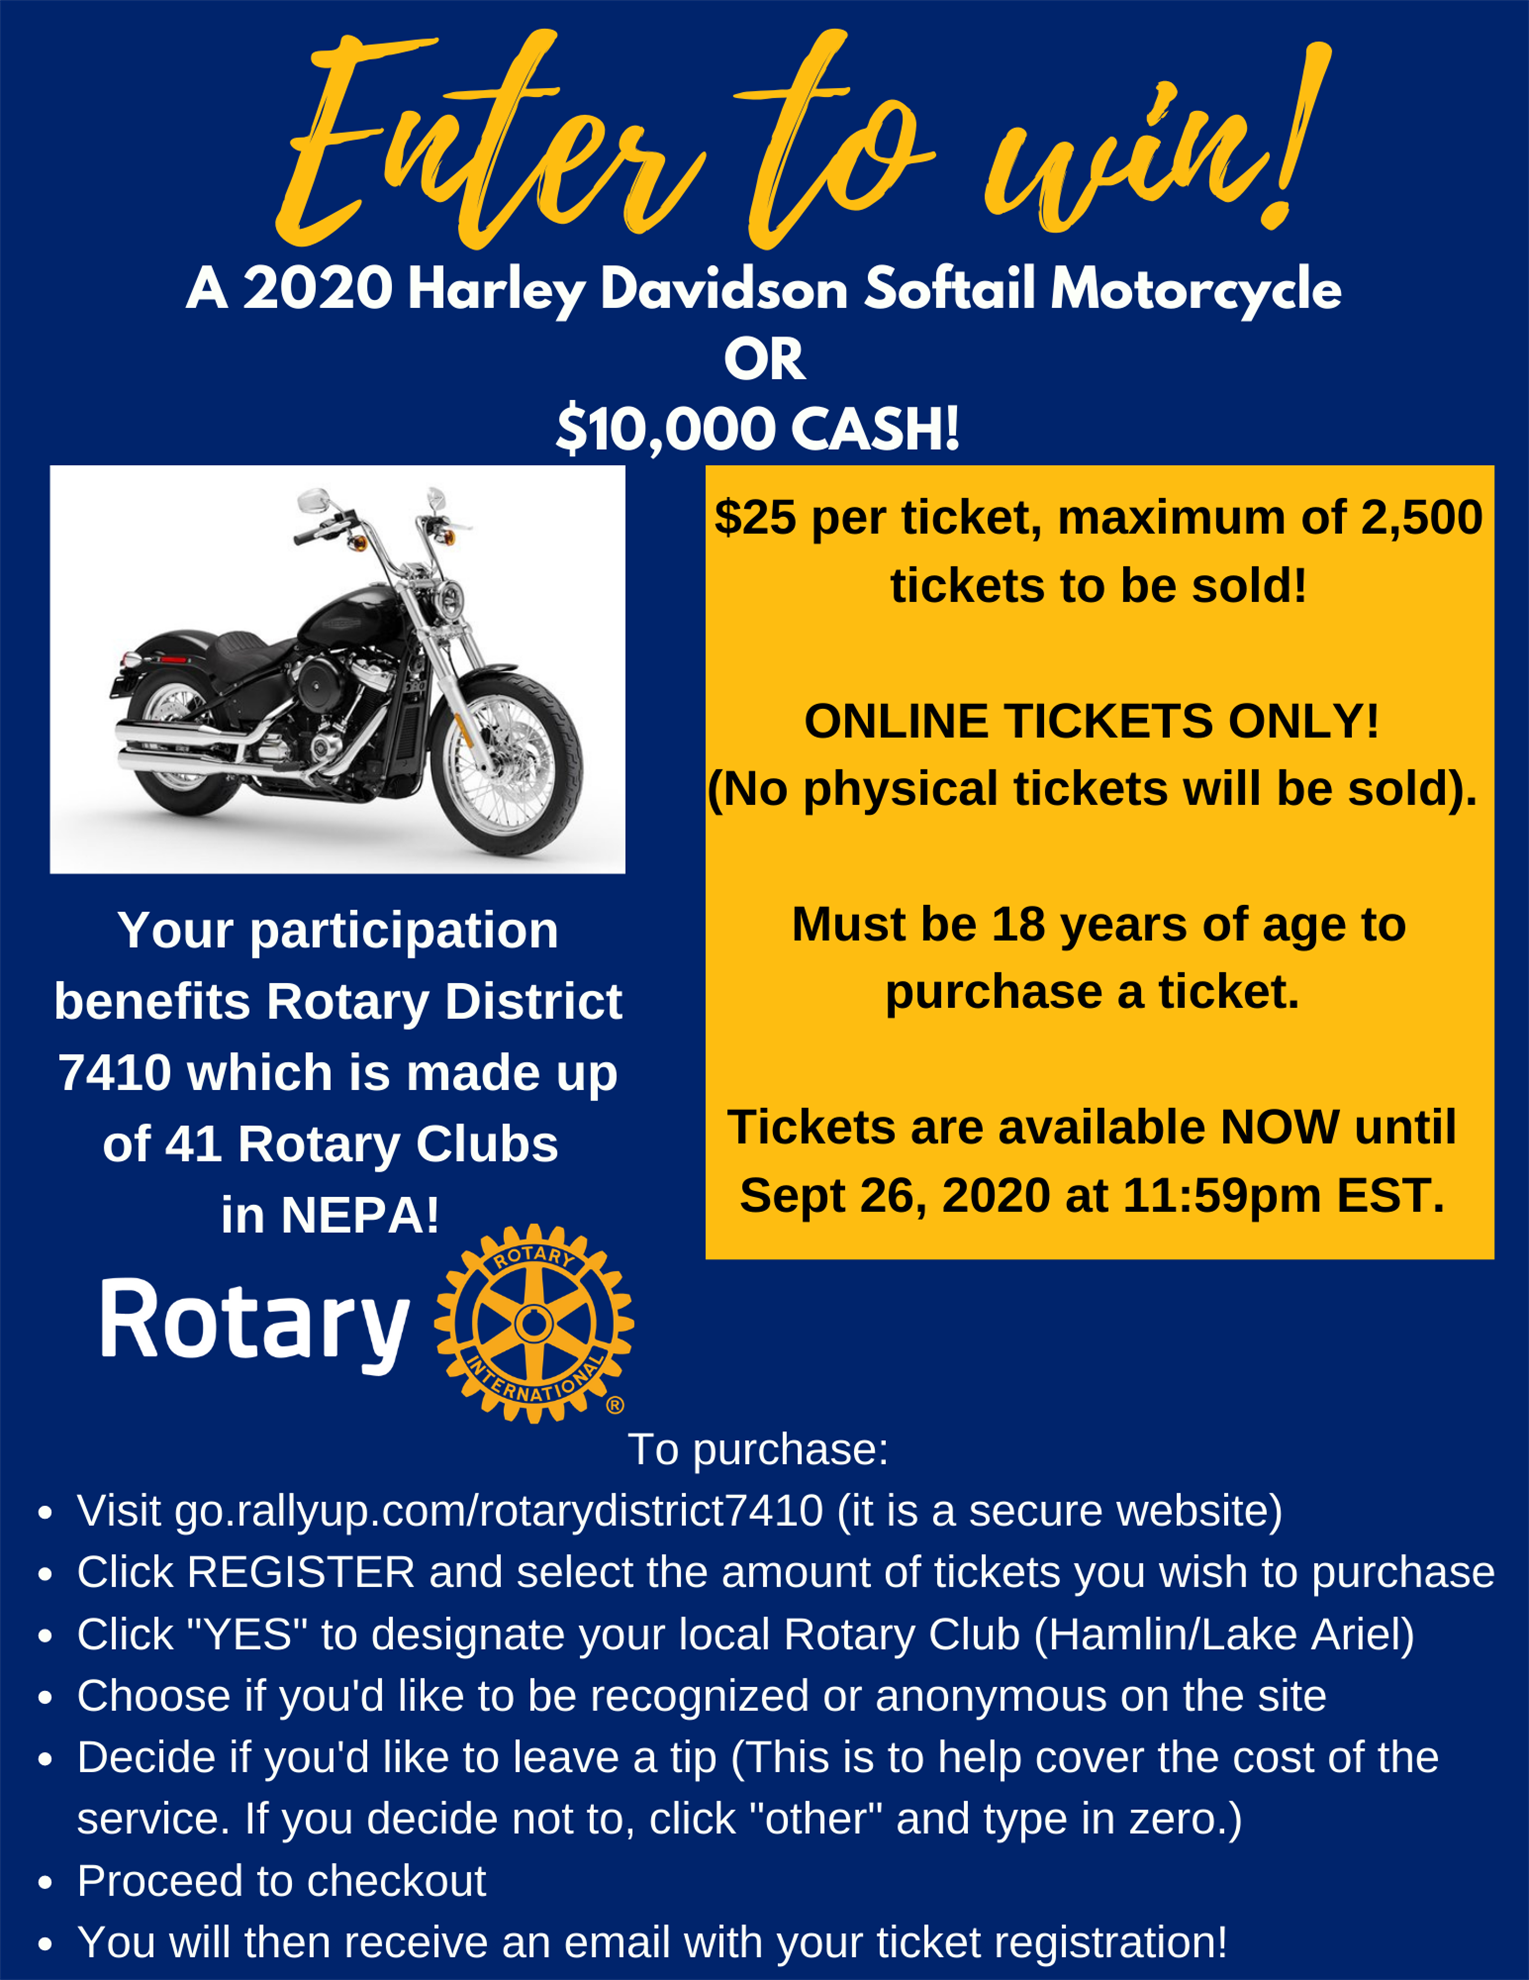 How To Legally Raffle A Motorcycle Reviewmotors.co